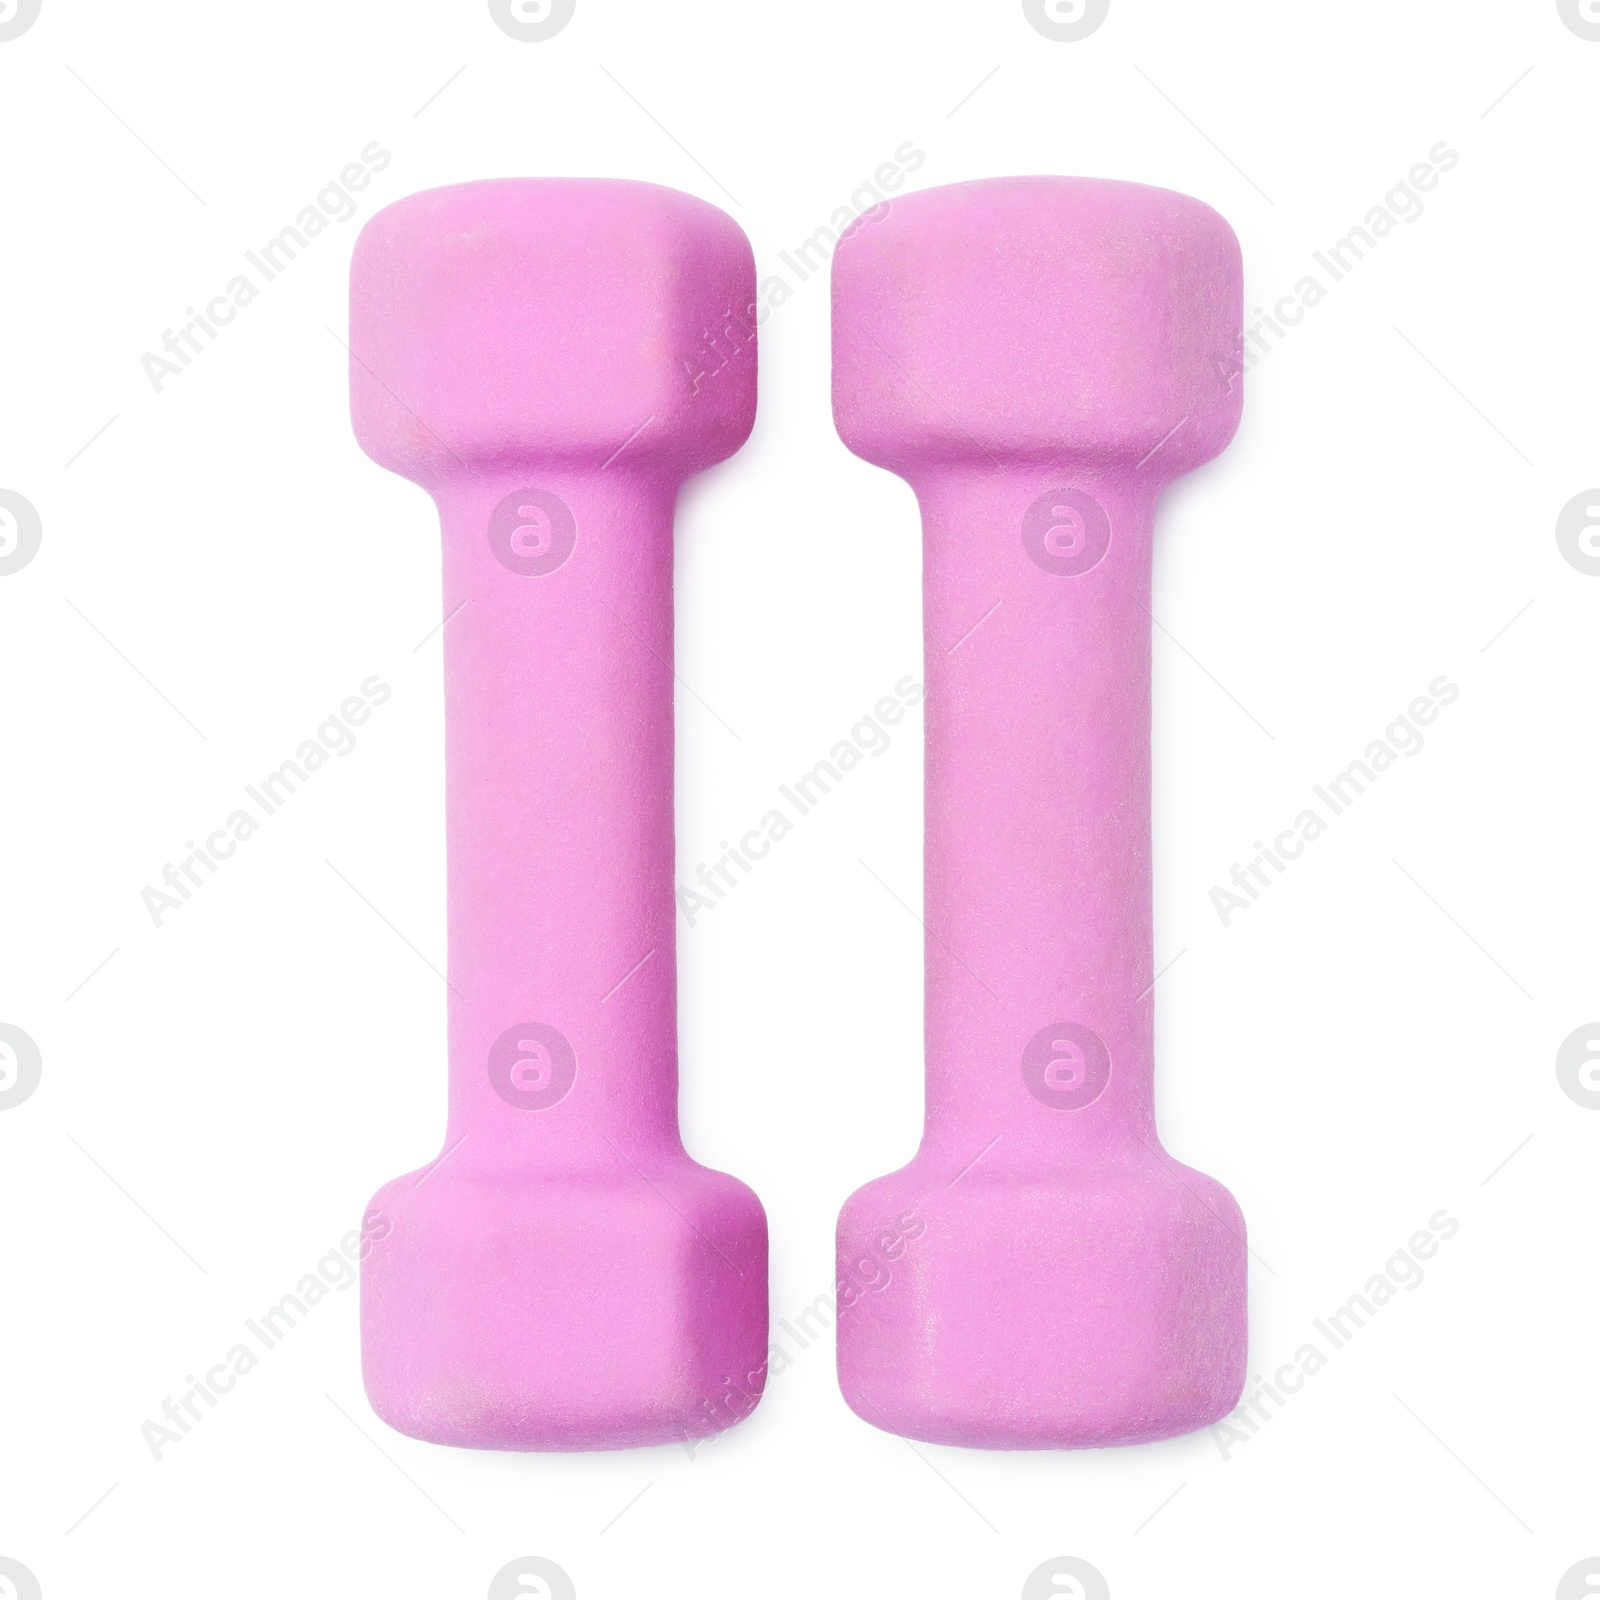 Photo of Violet dumbbells isolated on white, top view. Sports equipment